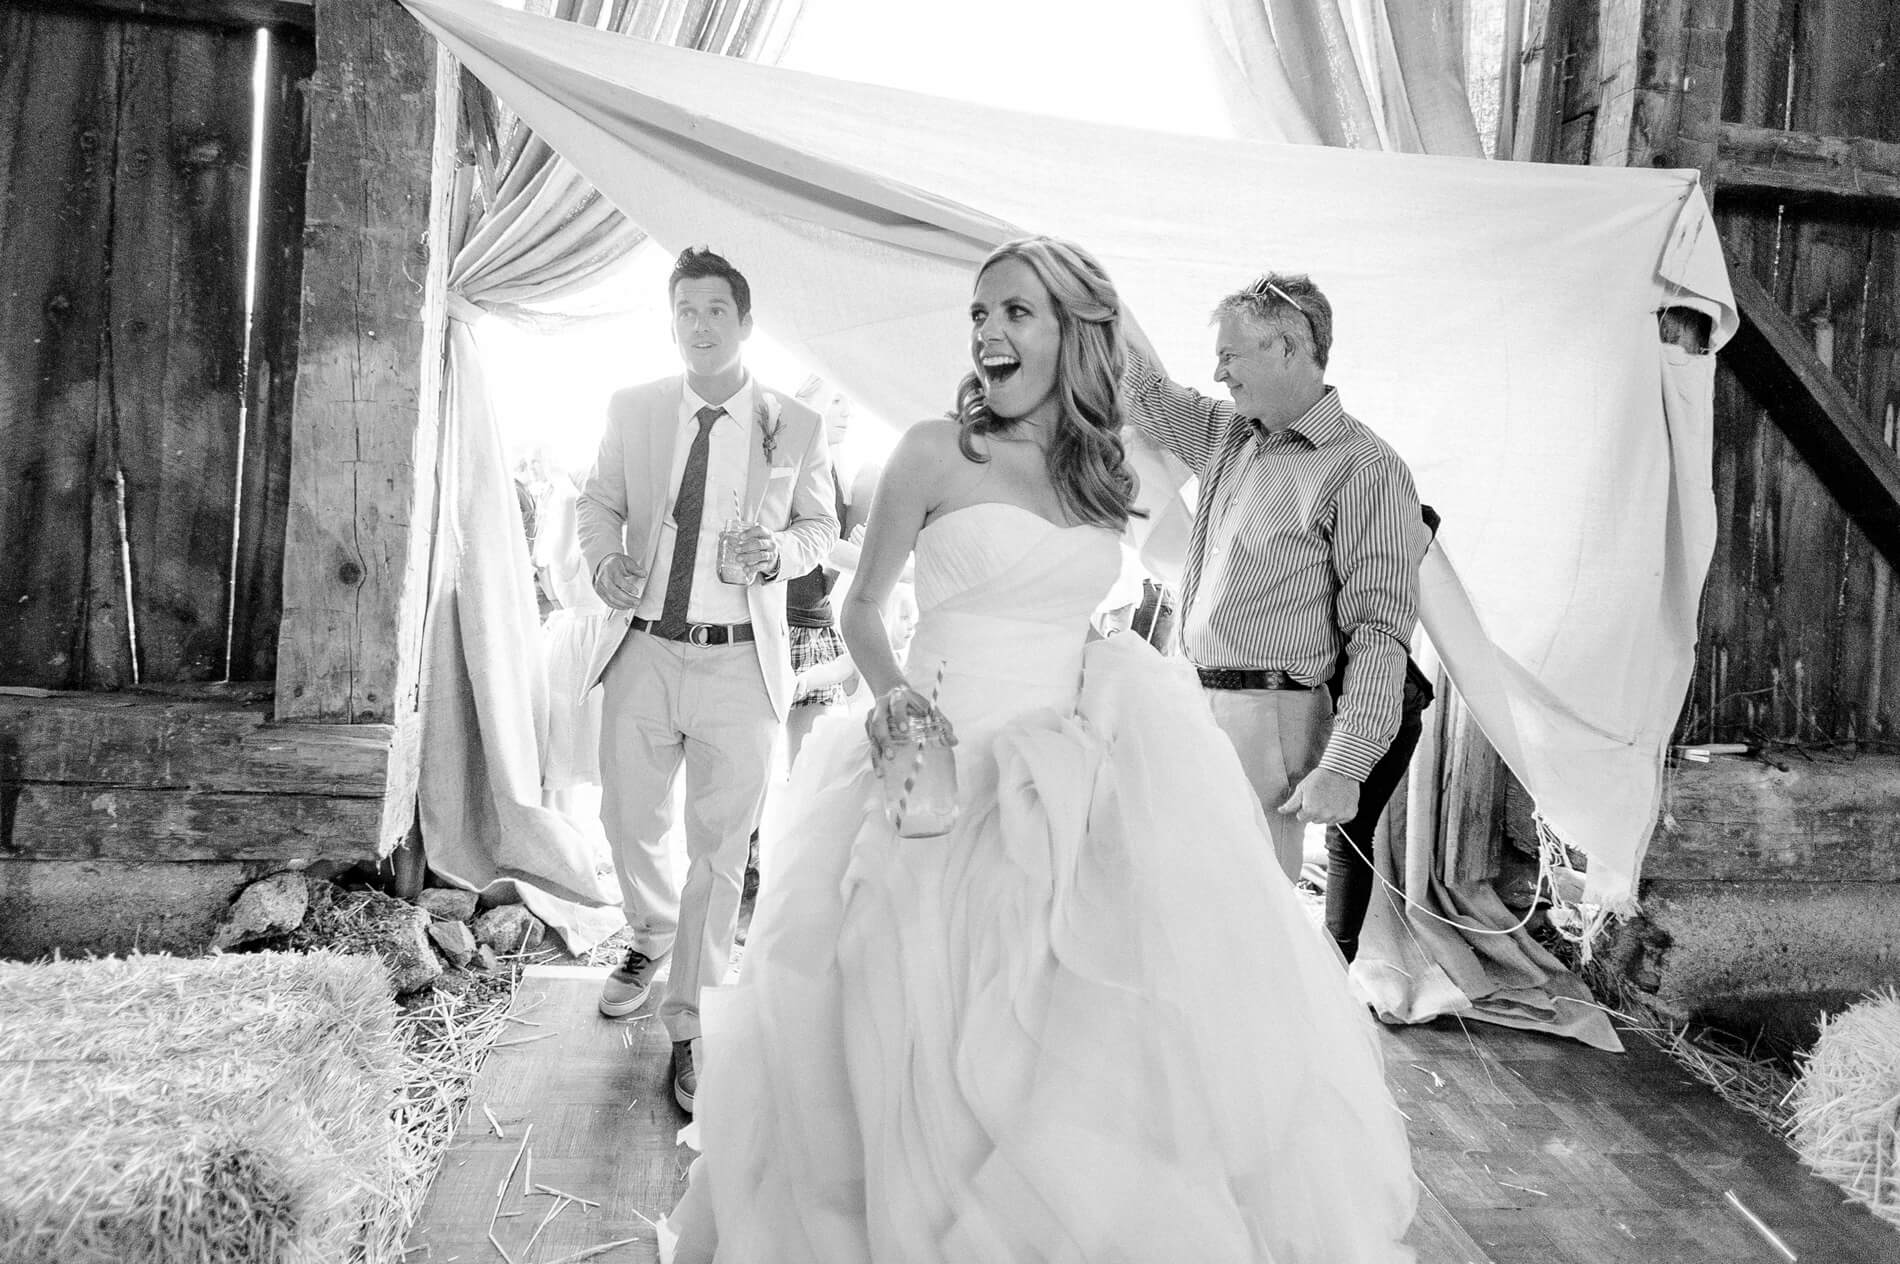 bride and groom reacting with joy seeing rustic barn decor first time